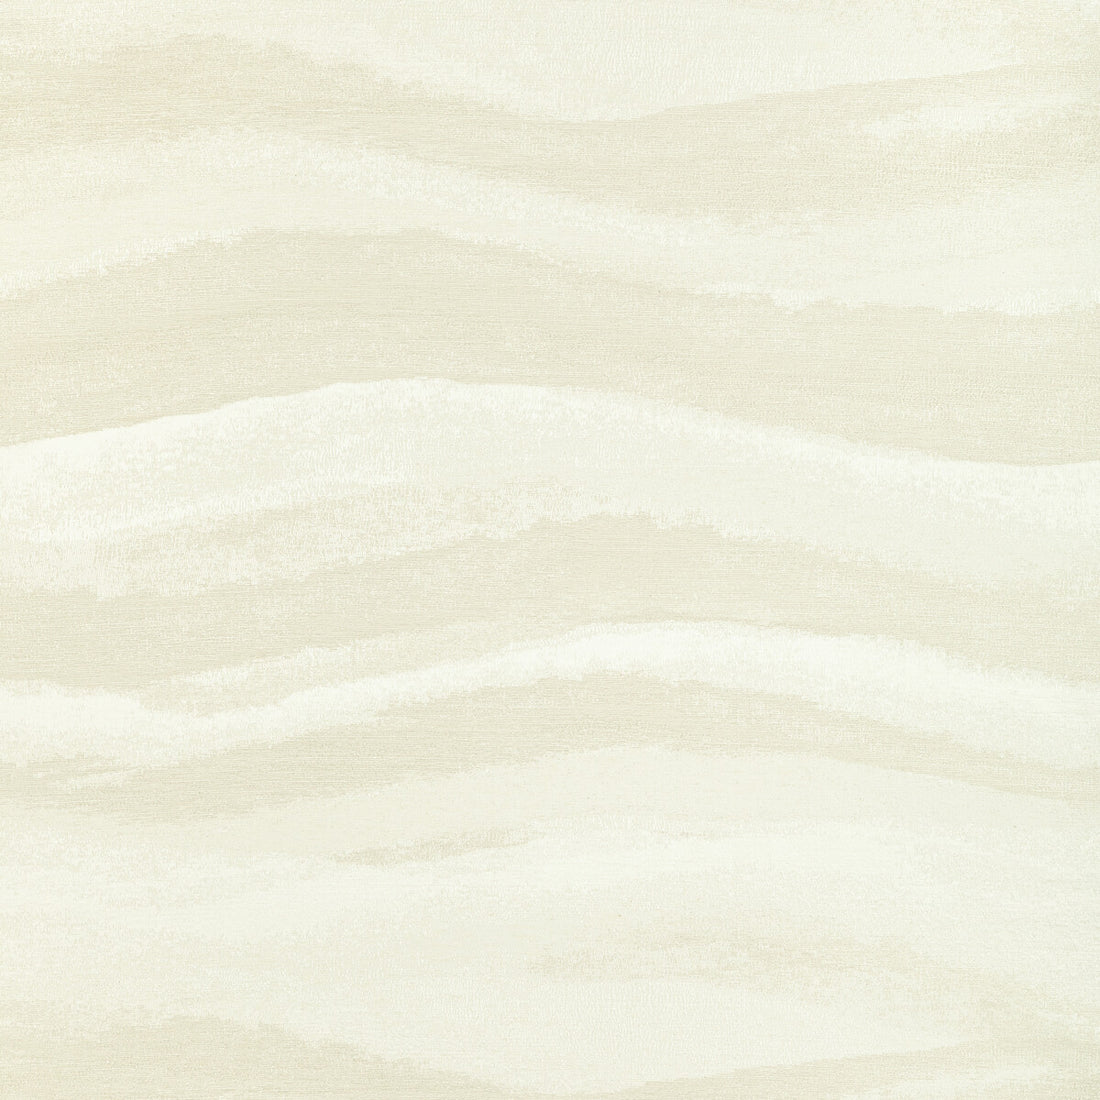 Silk Waves fabric in pearl color - pattern 4951.1116.0 - by Kravet Couture in the Modern Luxe Silk Luster collection